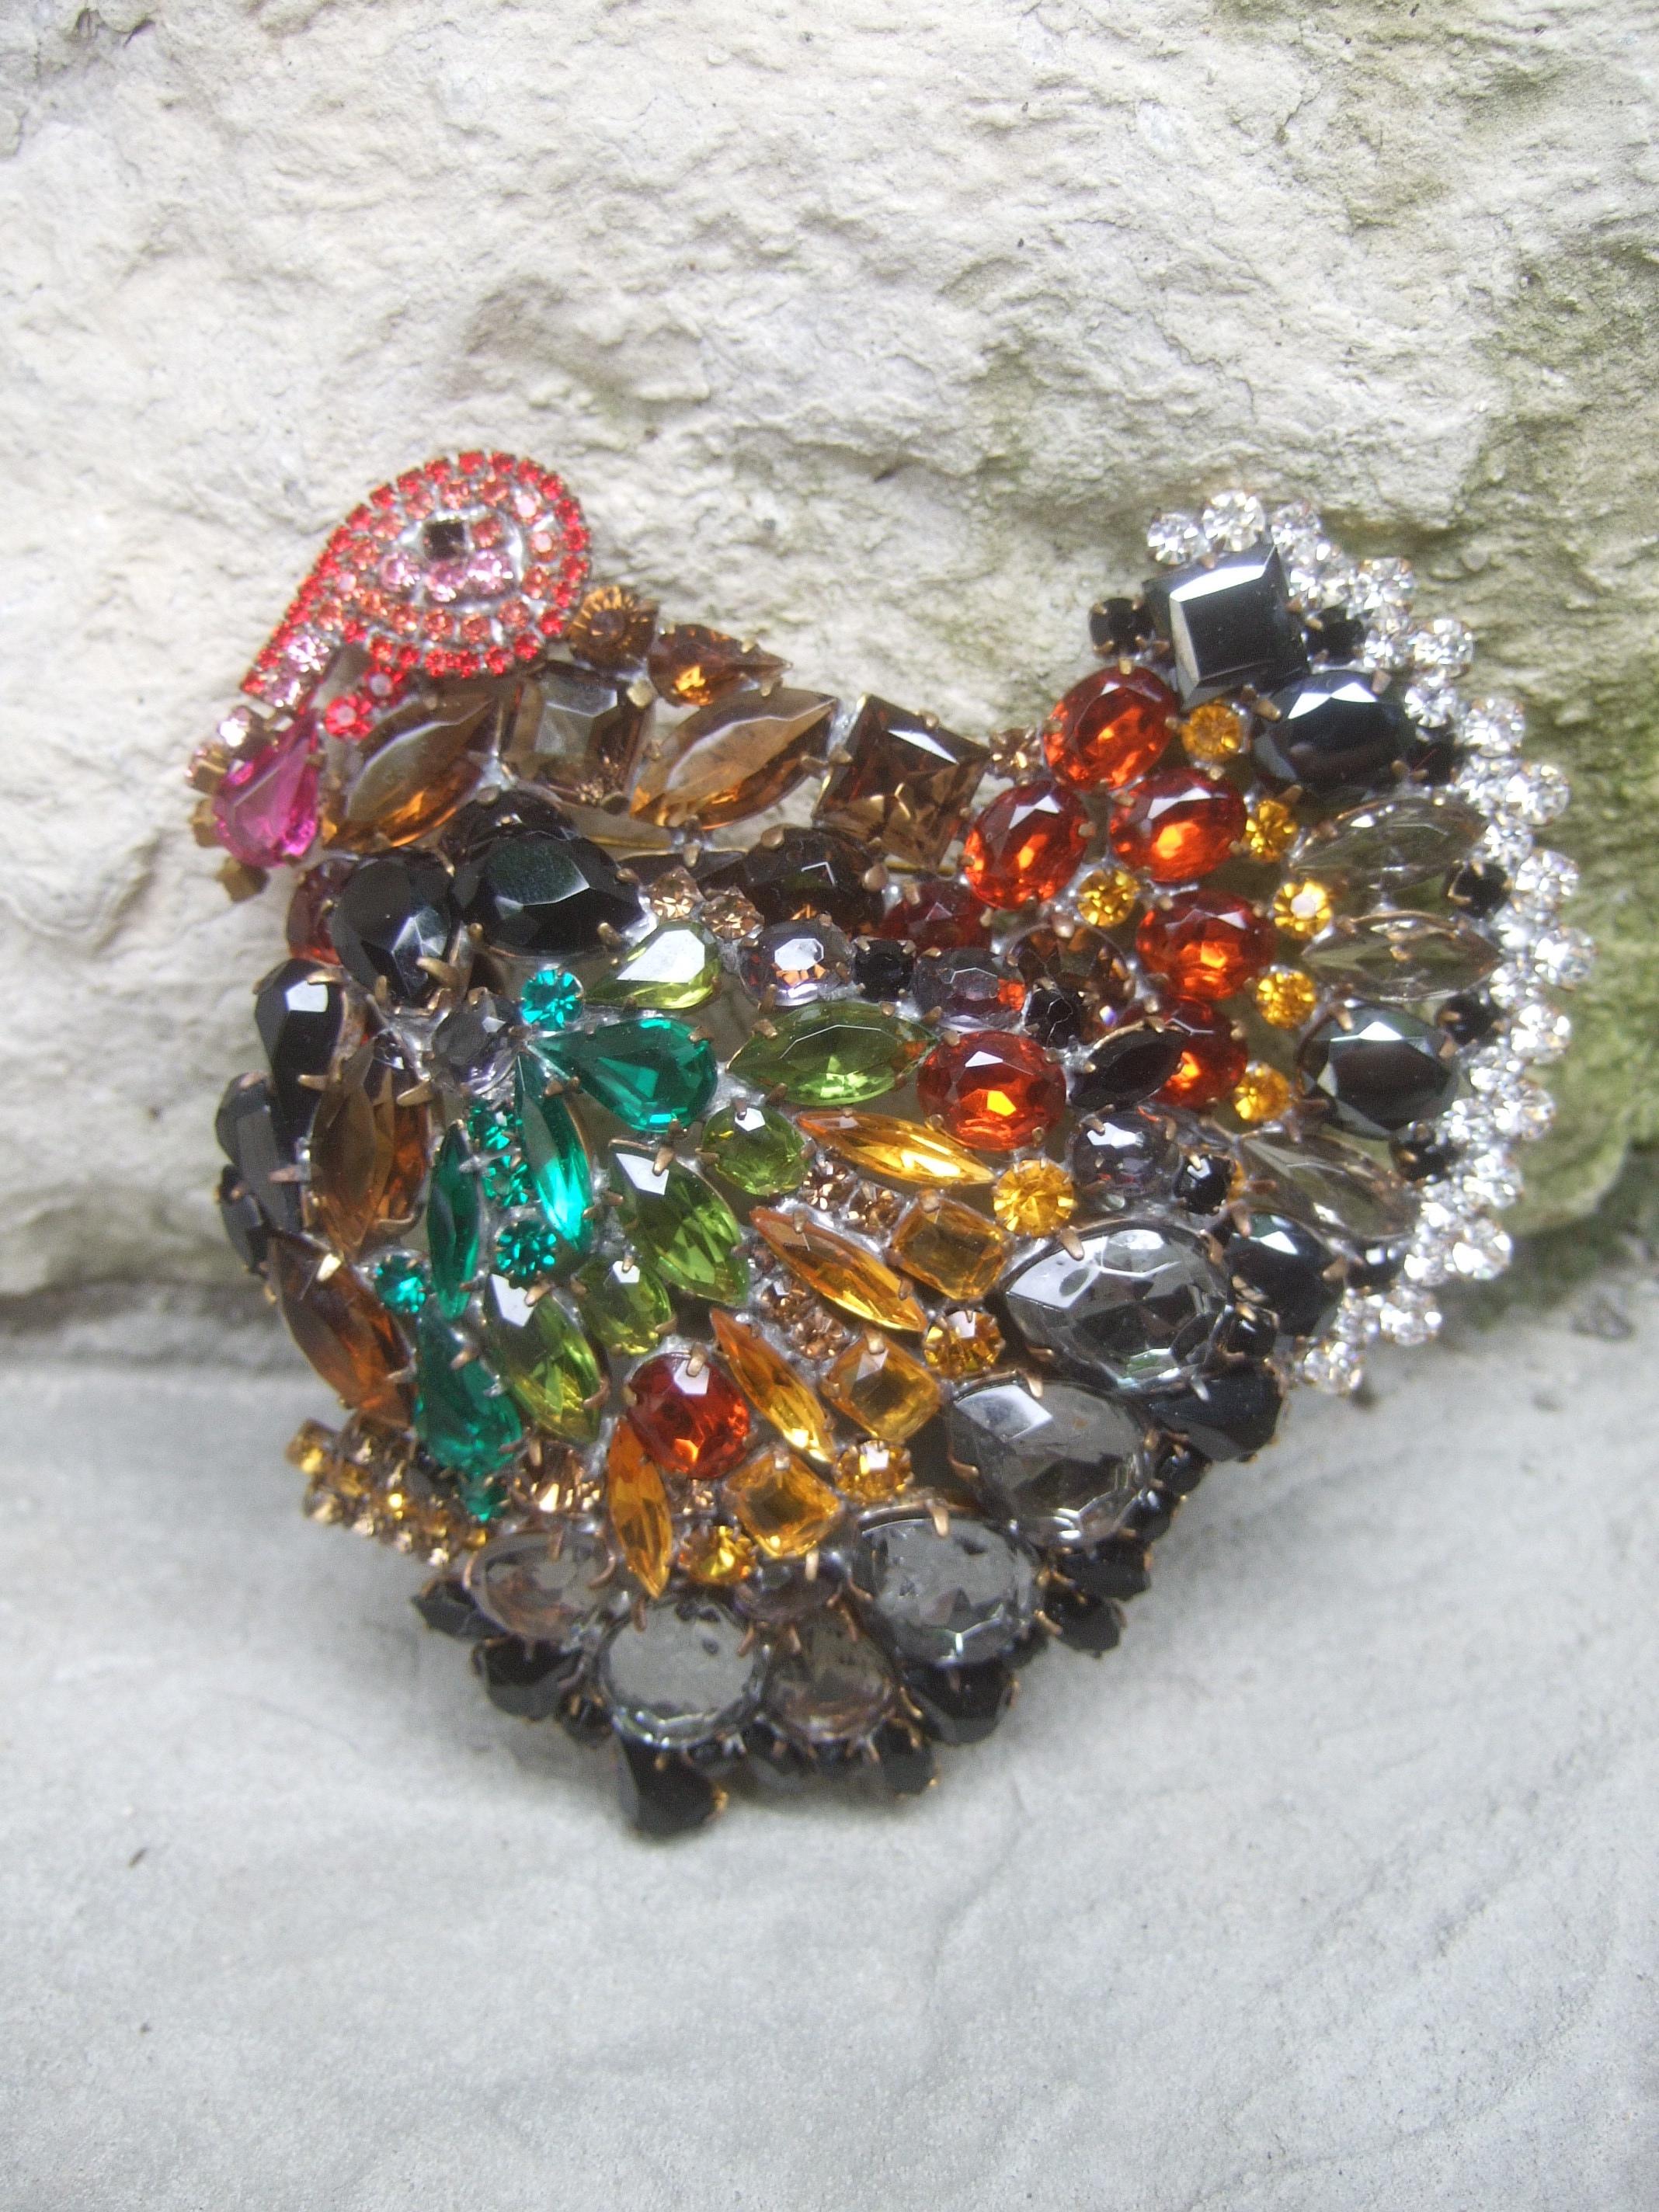 Huge massive glittering crystal turkey brooch designed by Lilien c 1980s
The large-scale showstopping figural turkey brooch in encrusted with a collection of glittering prong set crystals in autumn earth tone colors;
ranging from golden amber, deep